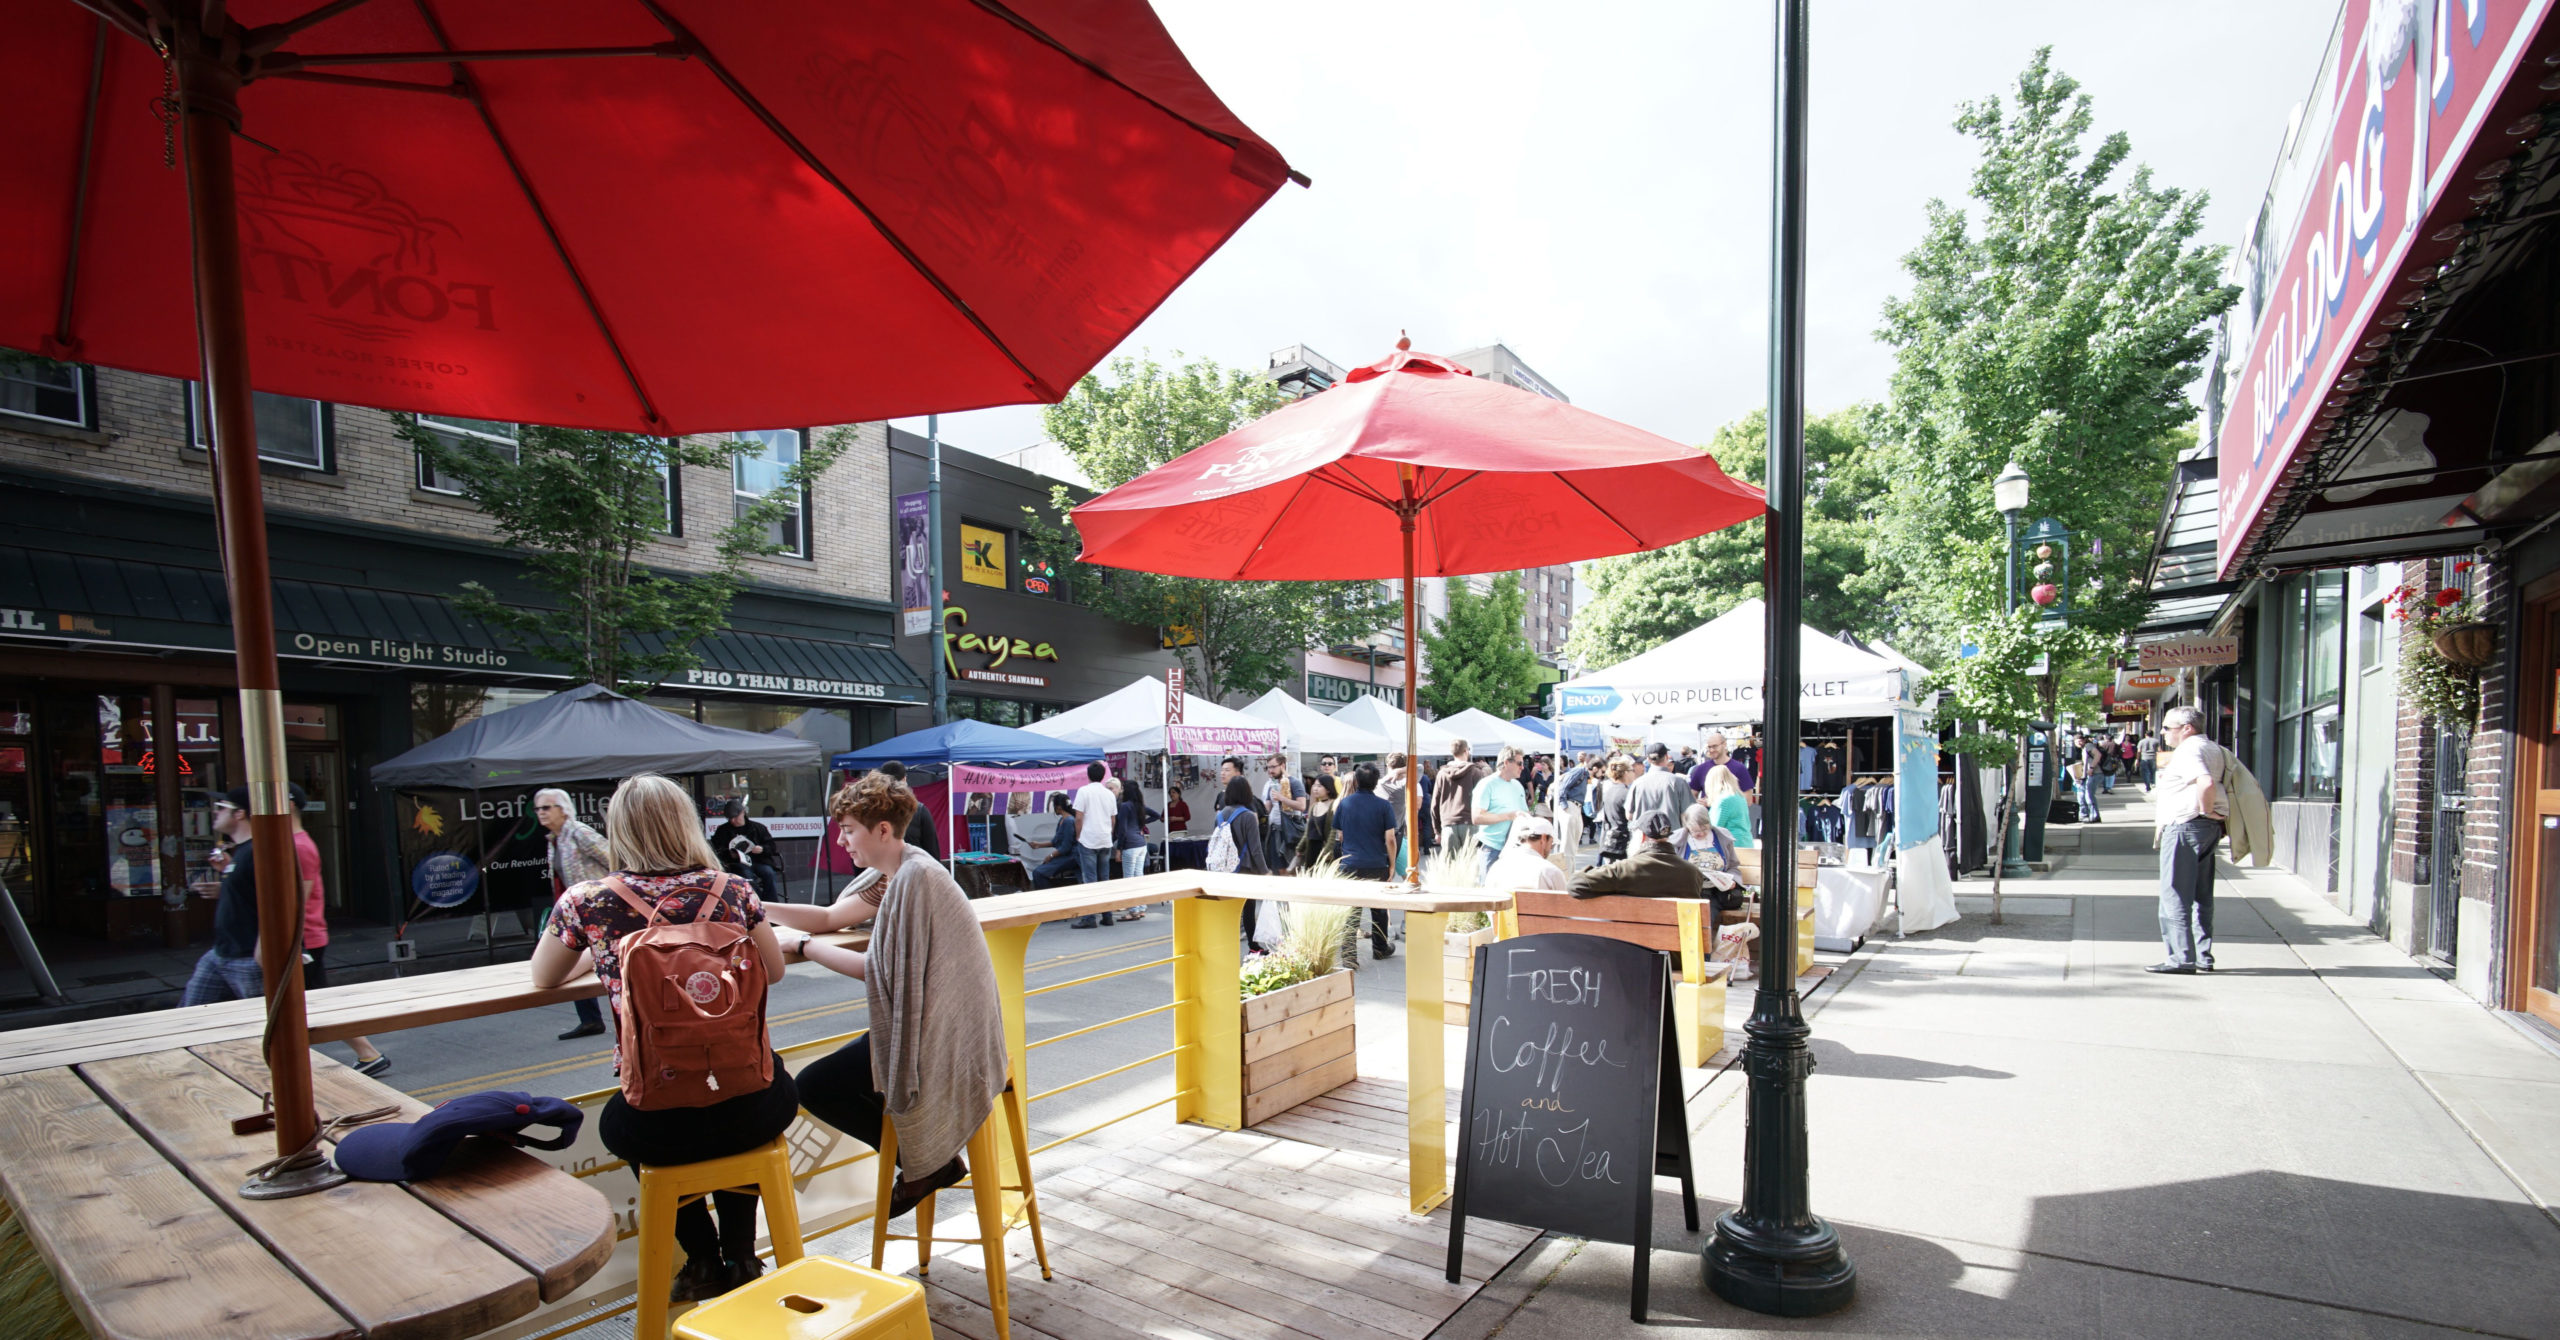 Street fair with pop-up tents and people dining in foreground